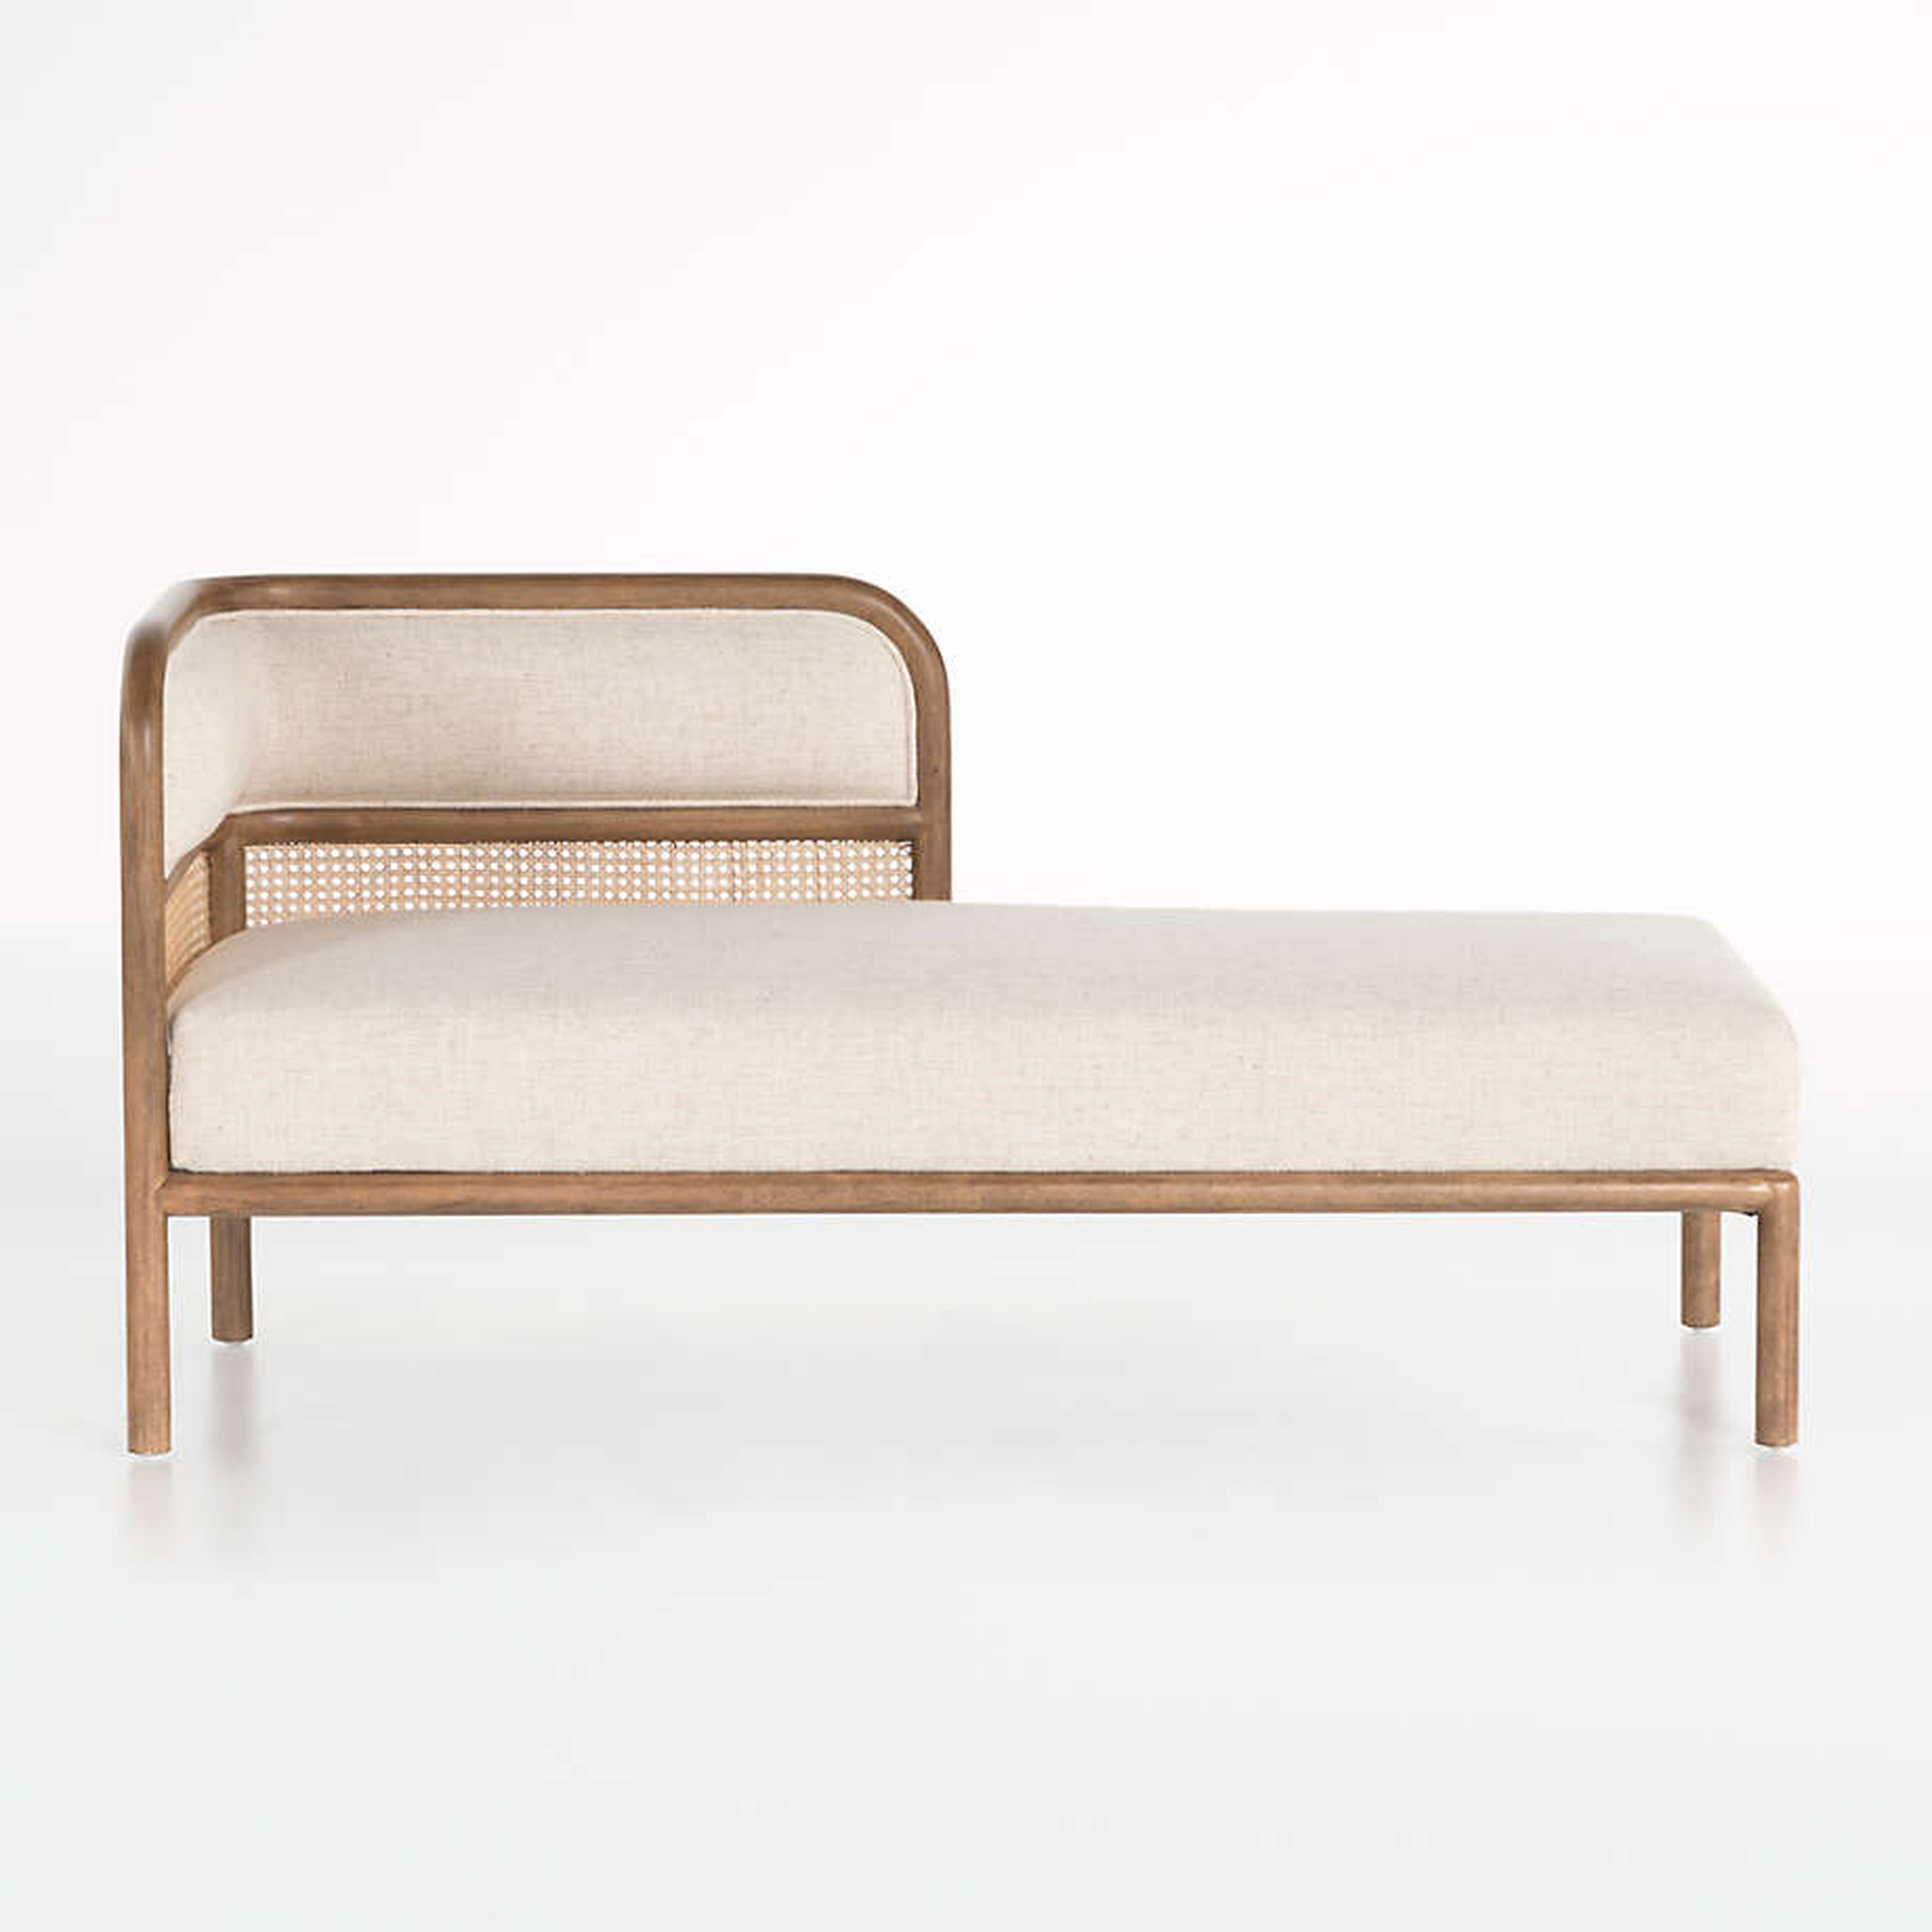 Raynor Left-Hand Chaise - Crate and Barrel